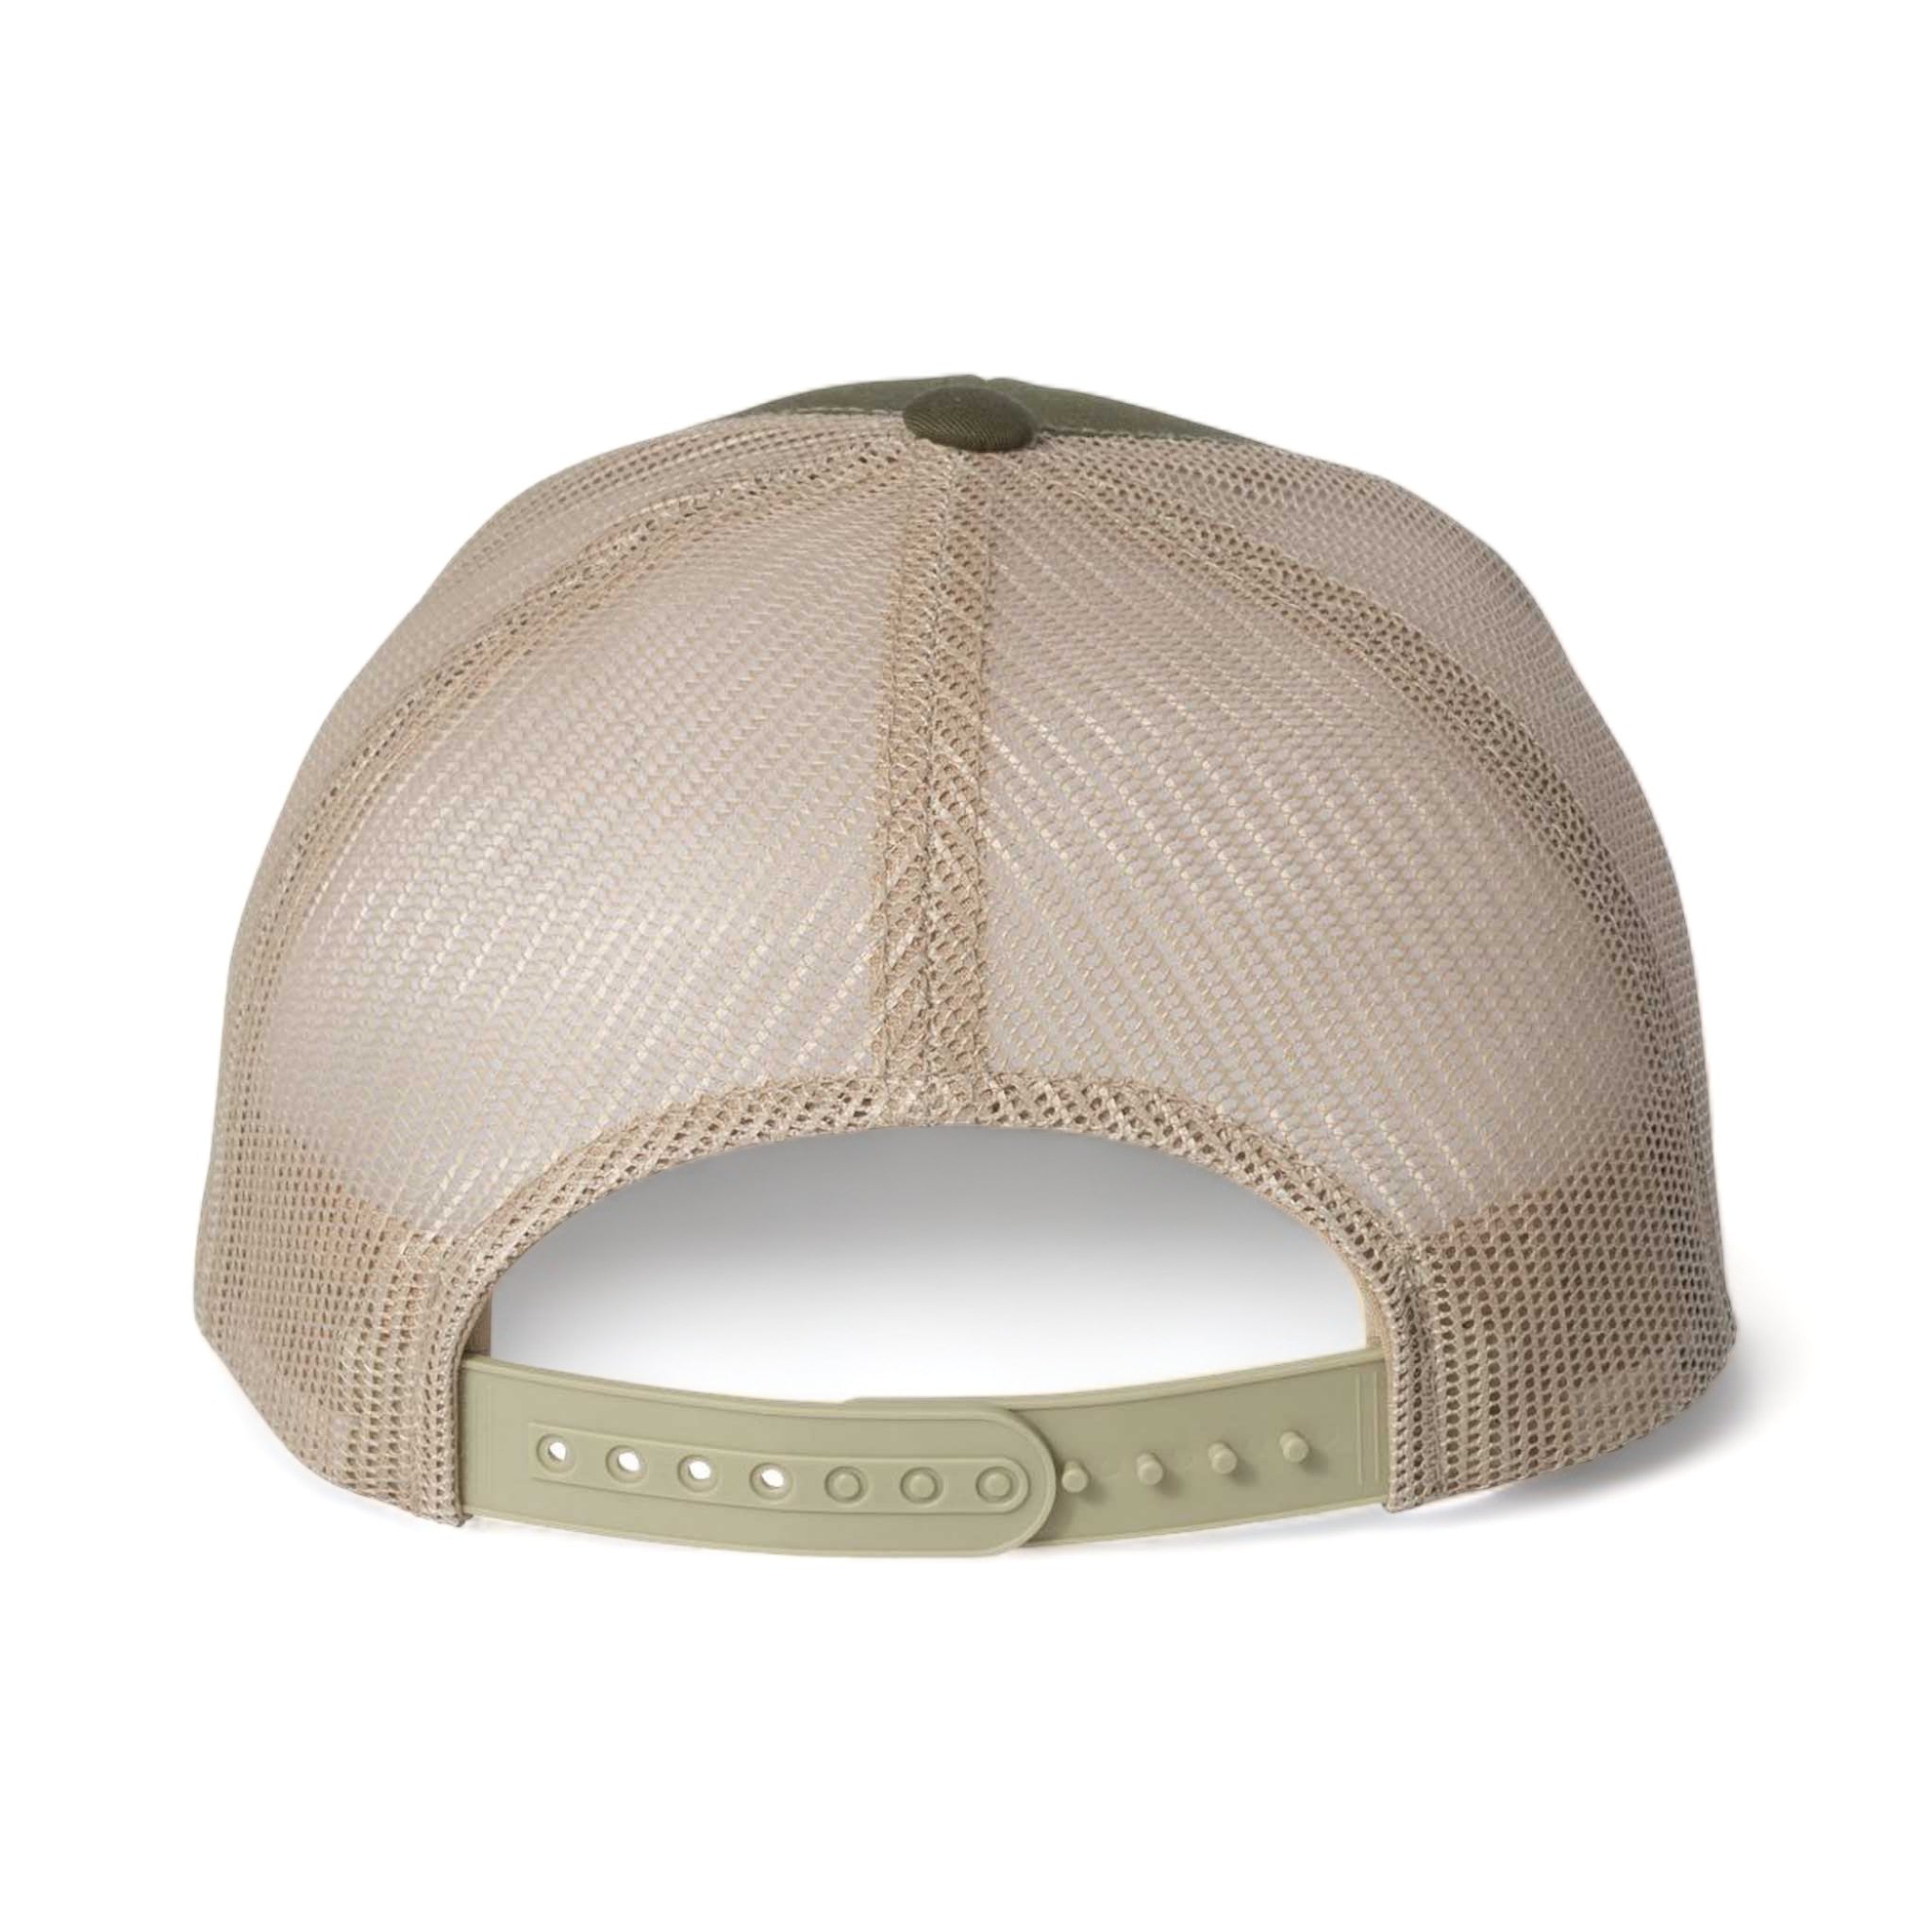 Back view of YP Classics 6606 custom hat in moss and khaki